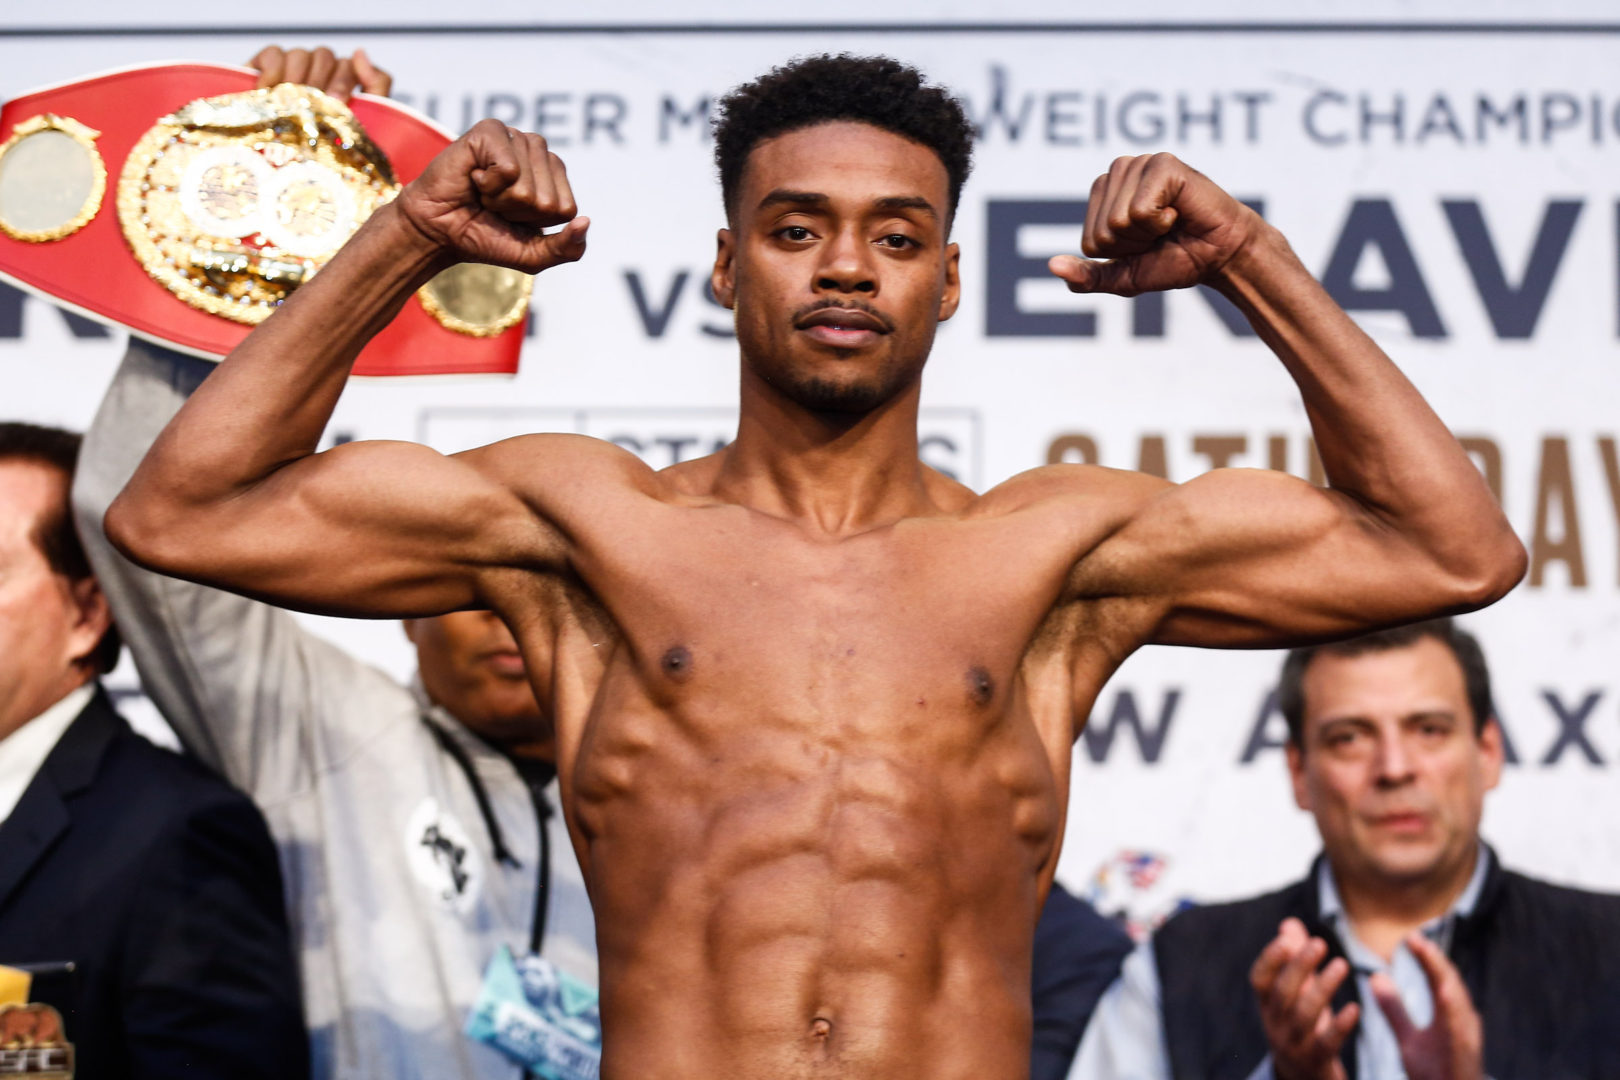 TICKETS GO ON SALE TOMORROW TO GENERAL PUBLIC FOR ERROL SPENCE JR. VS